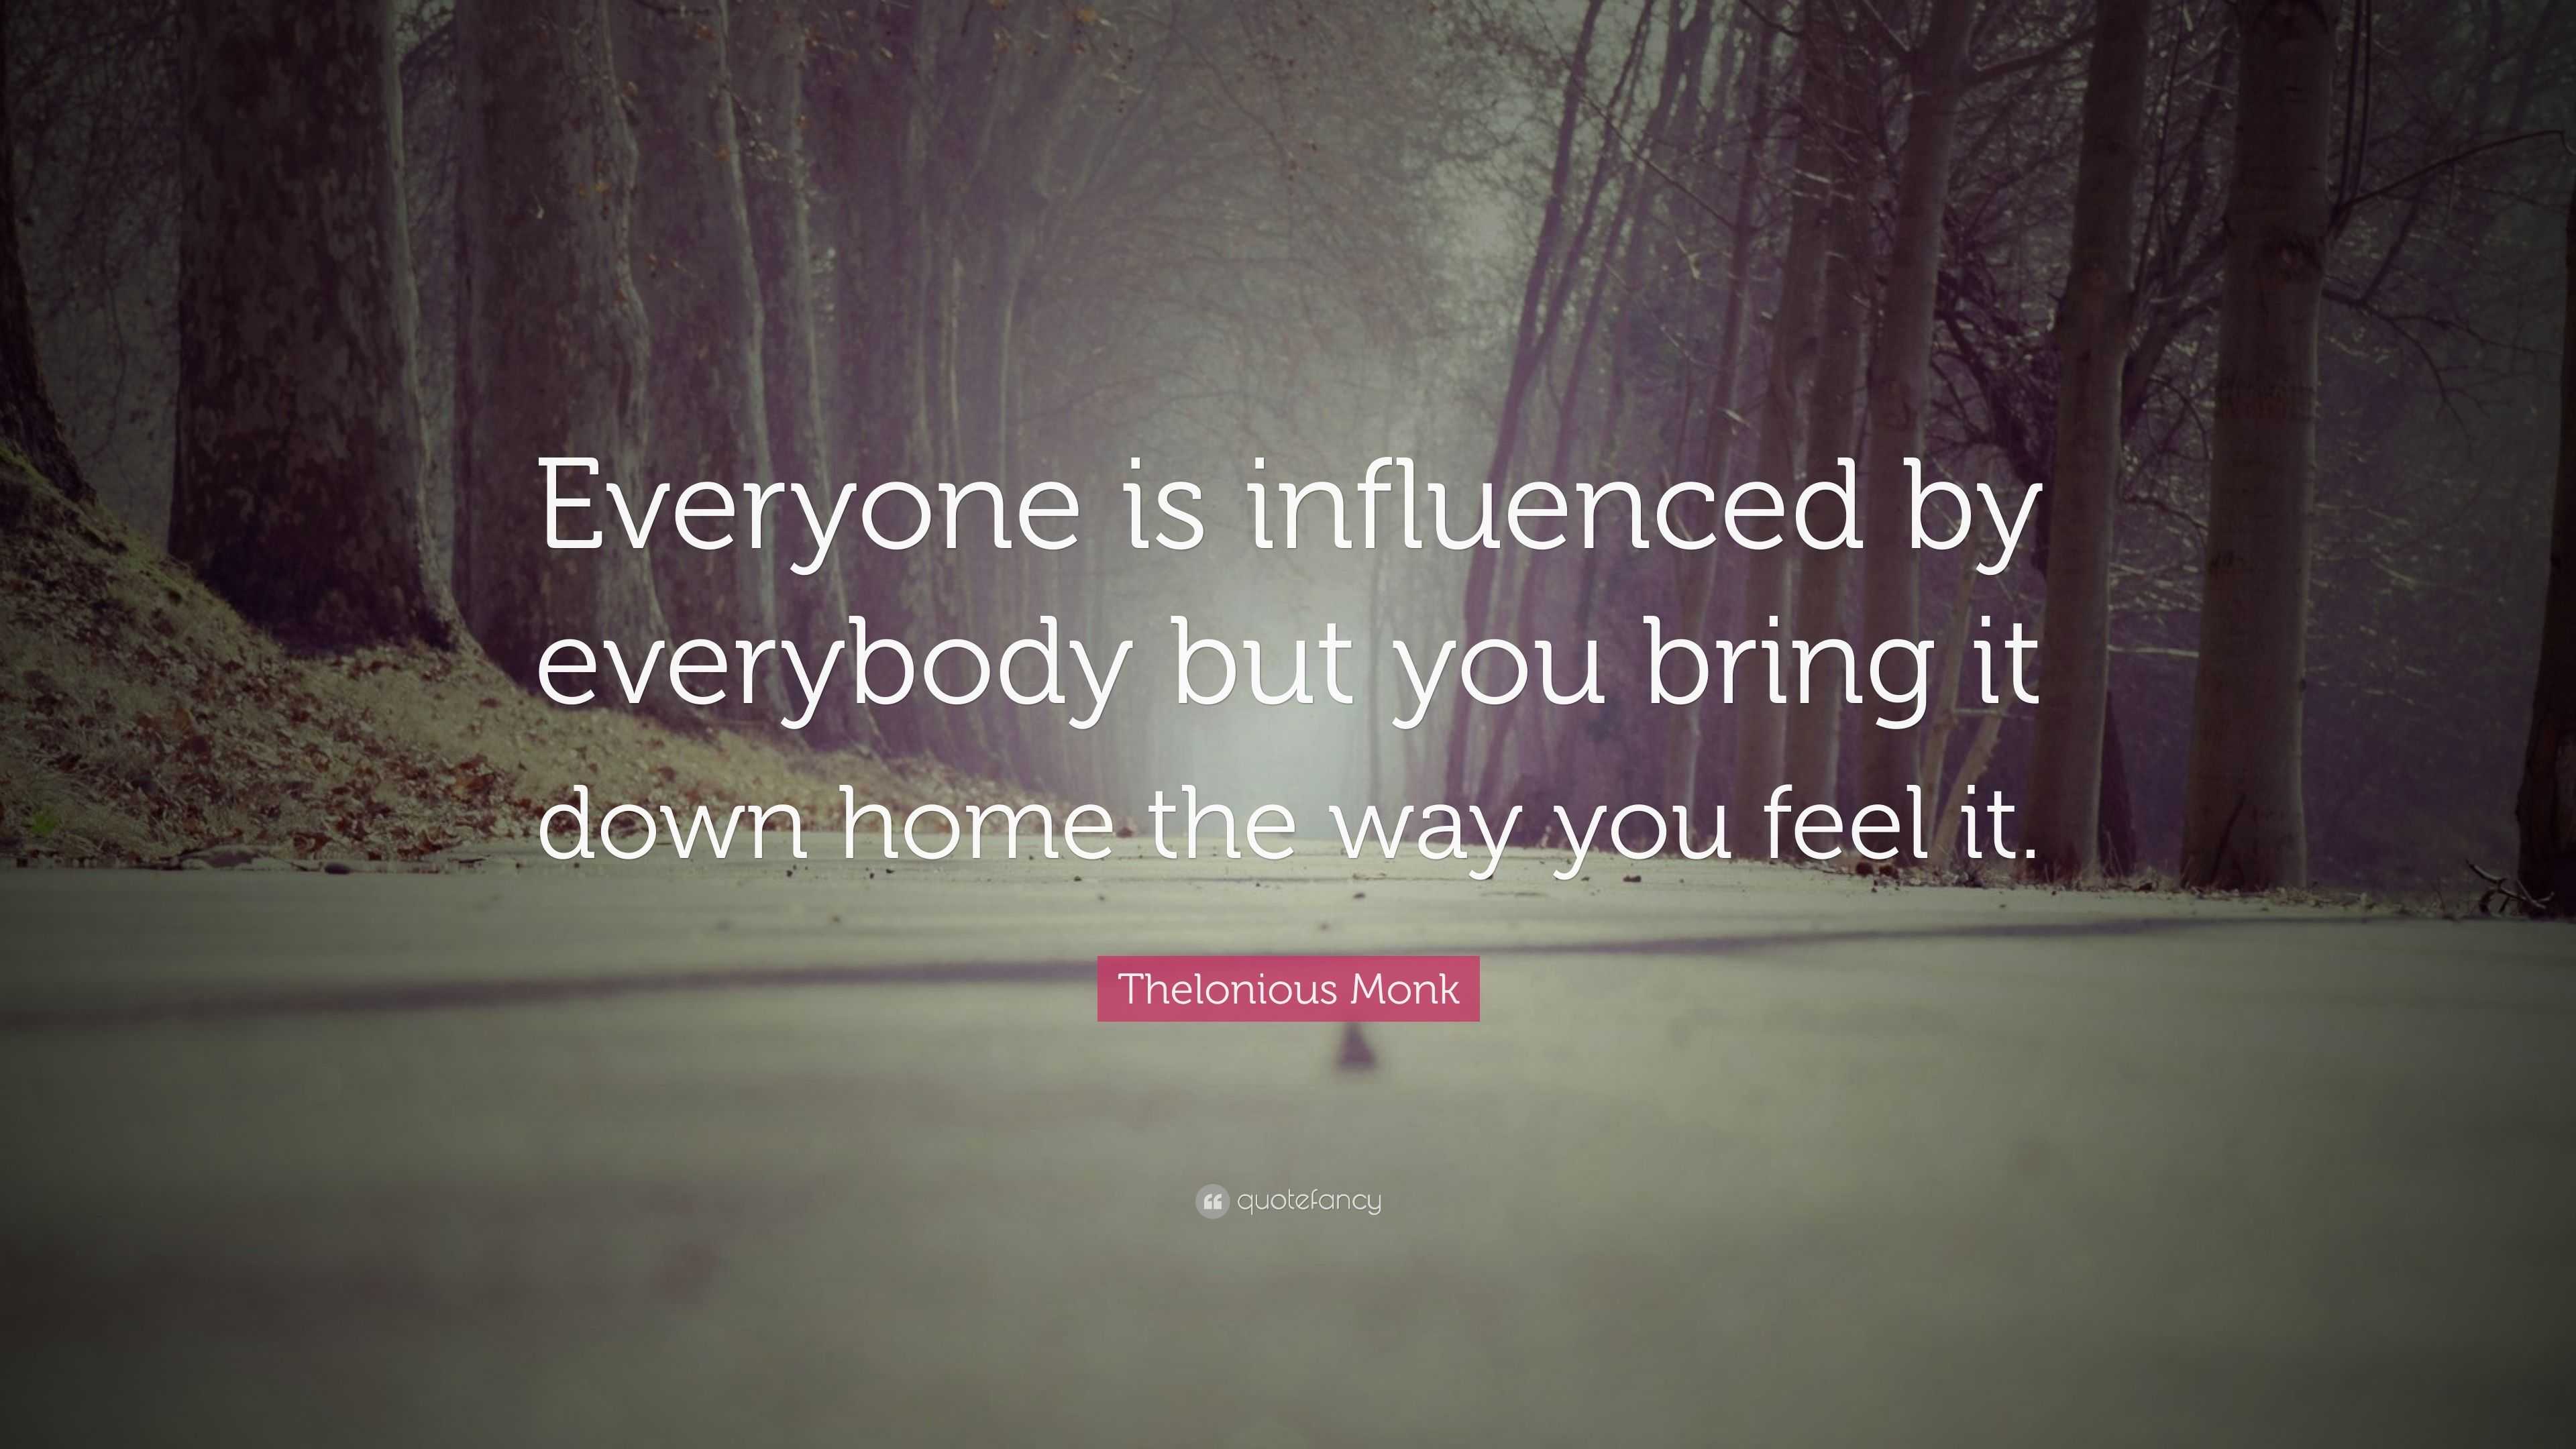 Thelonious Monk Quote: “Everyone is influenced by everybody but you ...